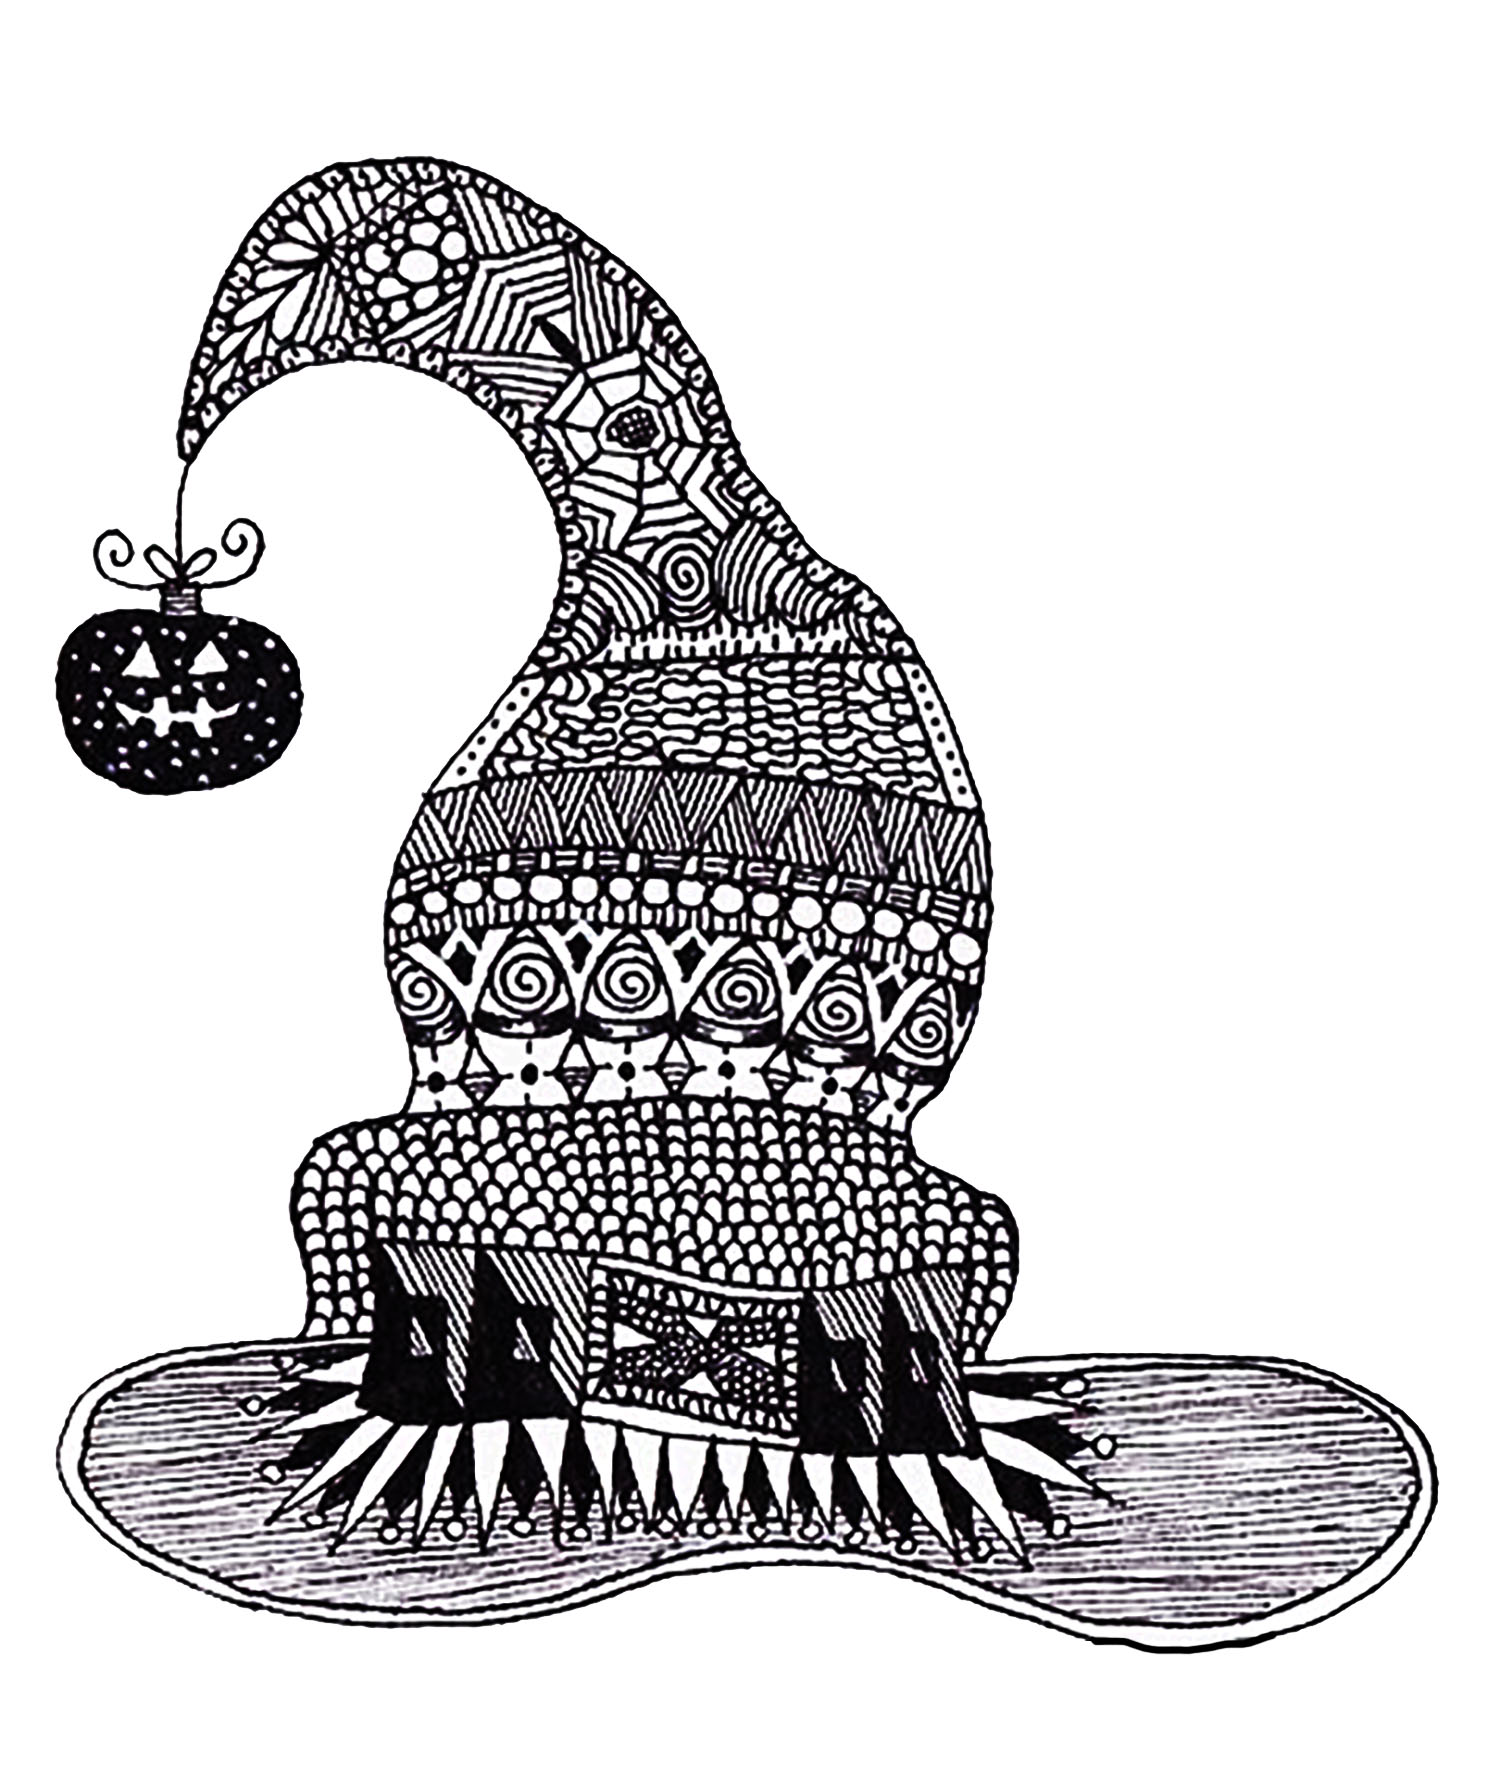 A Zentangle drawing representing a Witch Hat